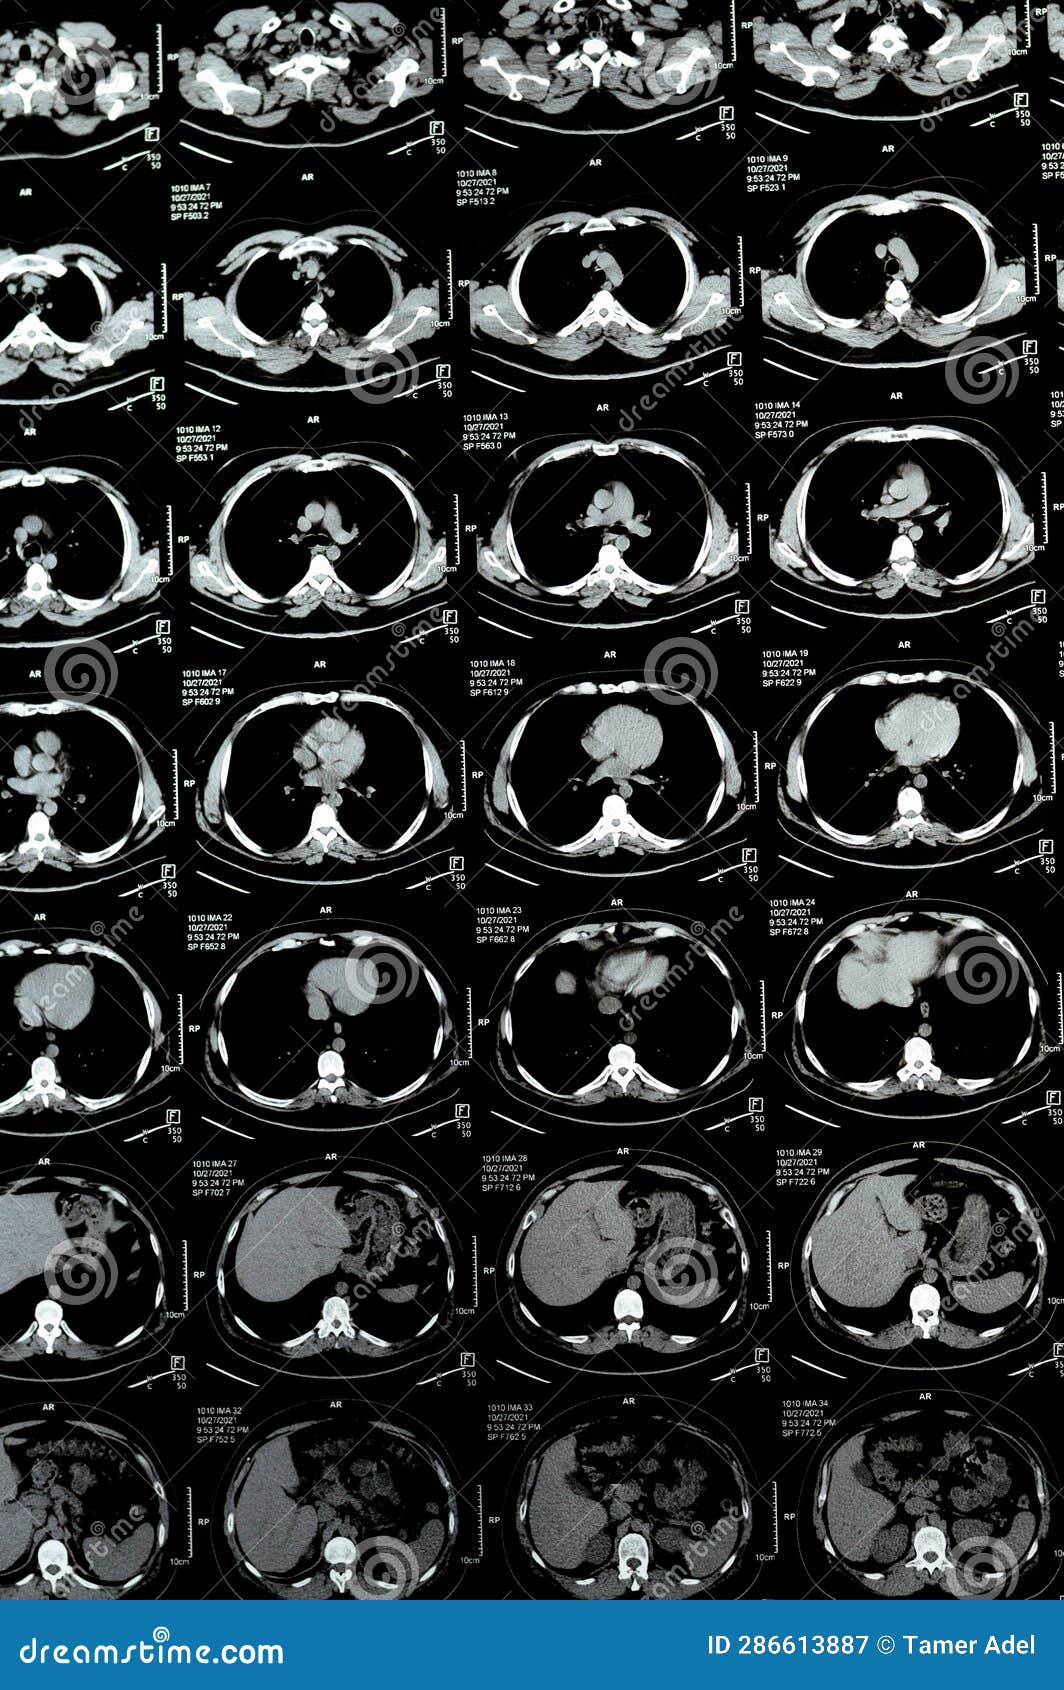 multi slice ct scan of the chest showing normal study, normal appearance of the lungs, parenchyma, pulmonary vasculature,